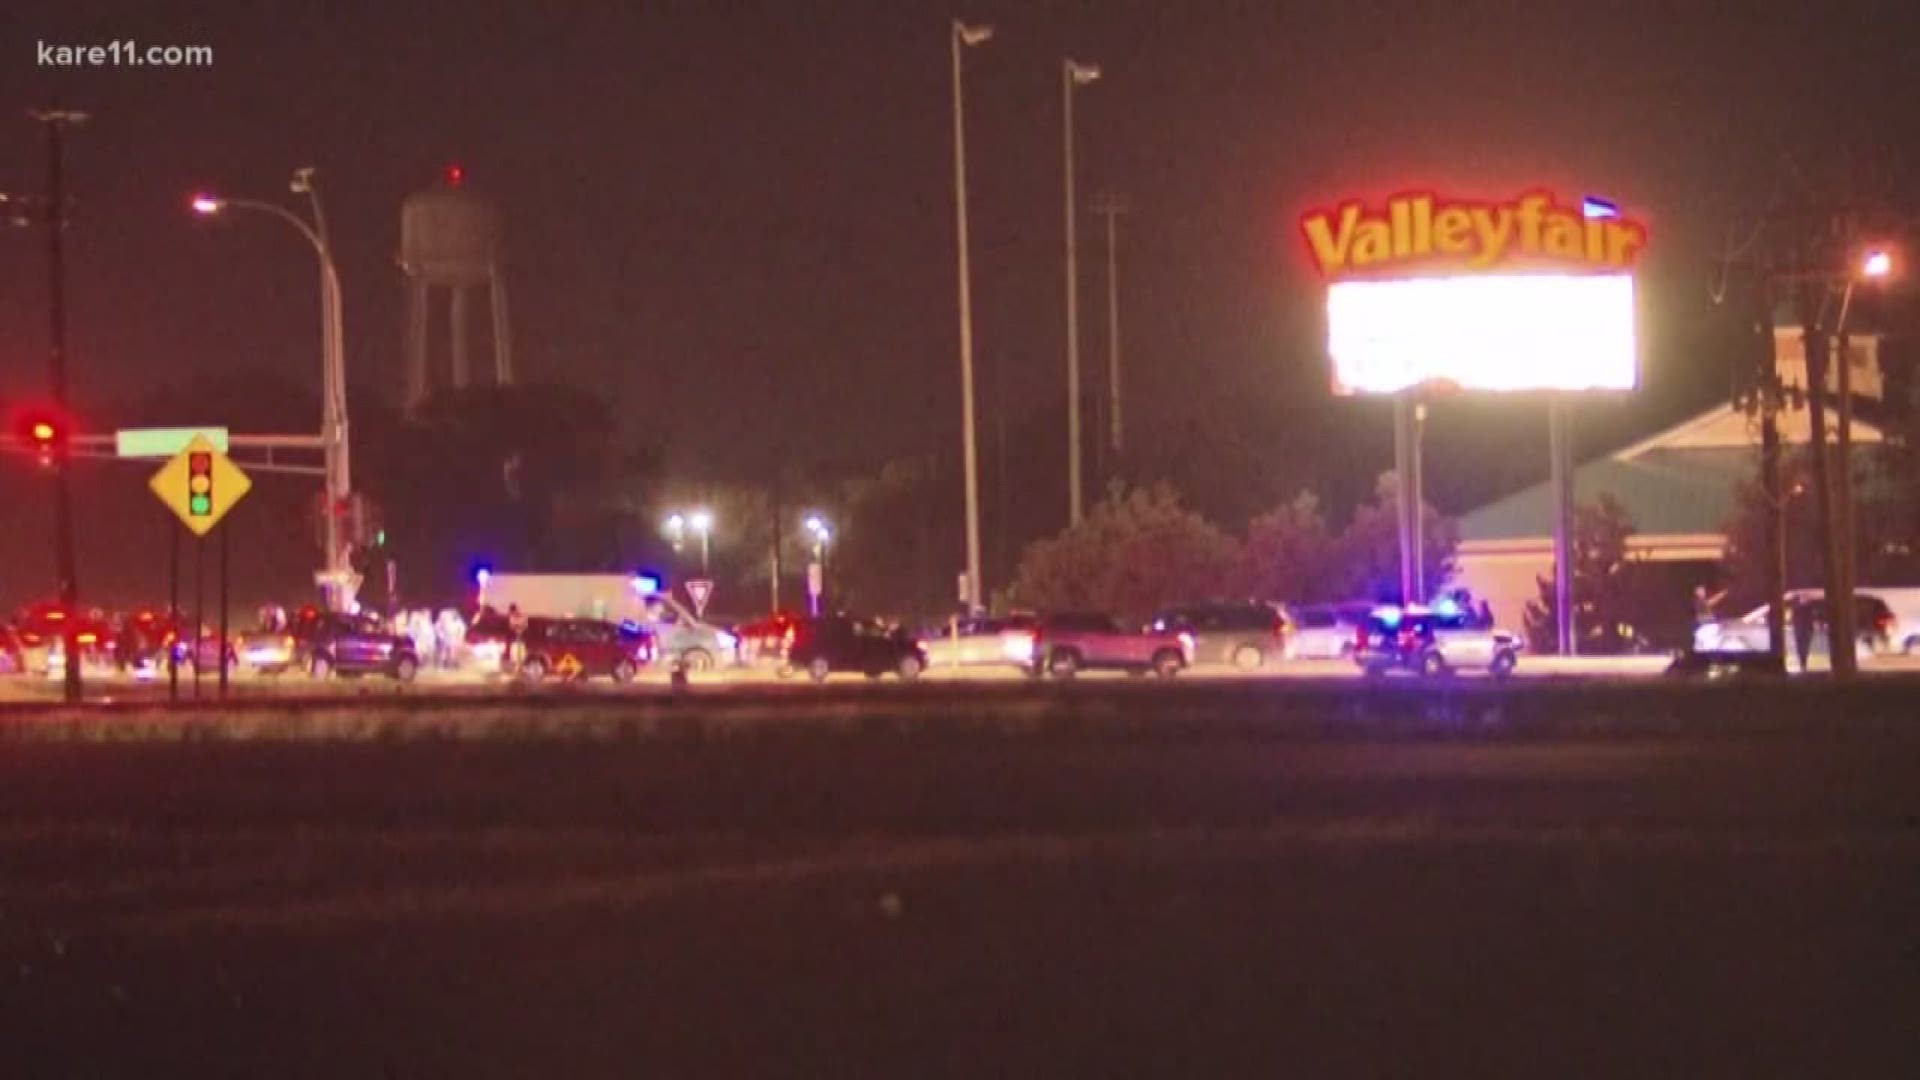 KARE 11 has received numerous questions about what led to the evacuation of Valleyfair during the Saturday night ValleyScare festivities. Shakopee police are working to separate fact from fiction. https://kare11.tv/2Q4Tl67